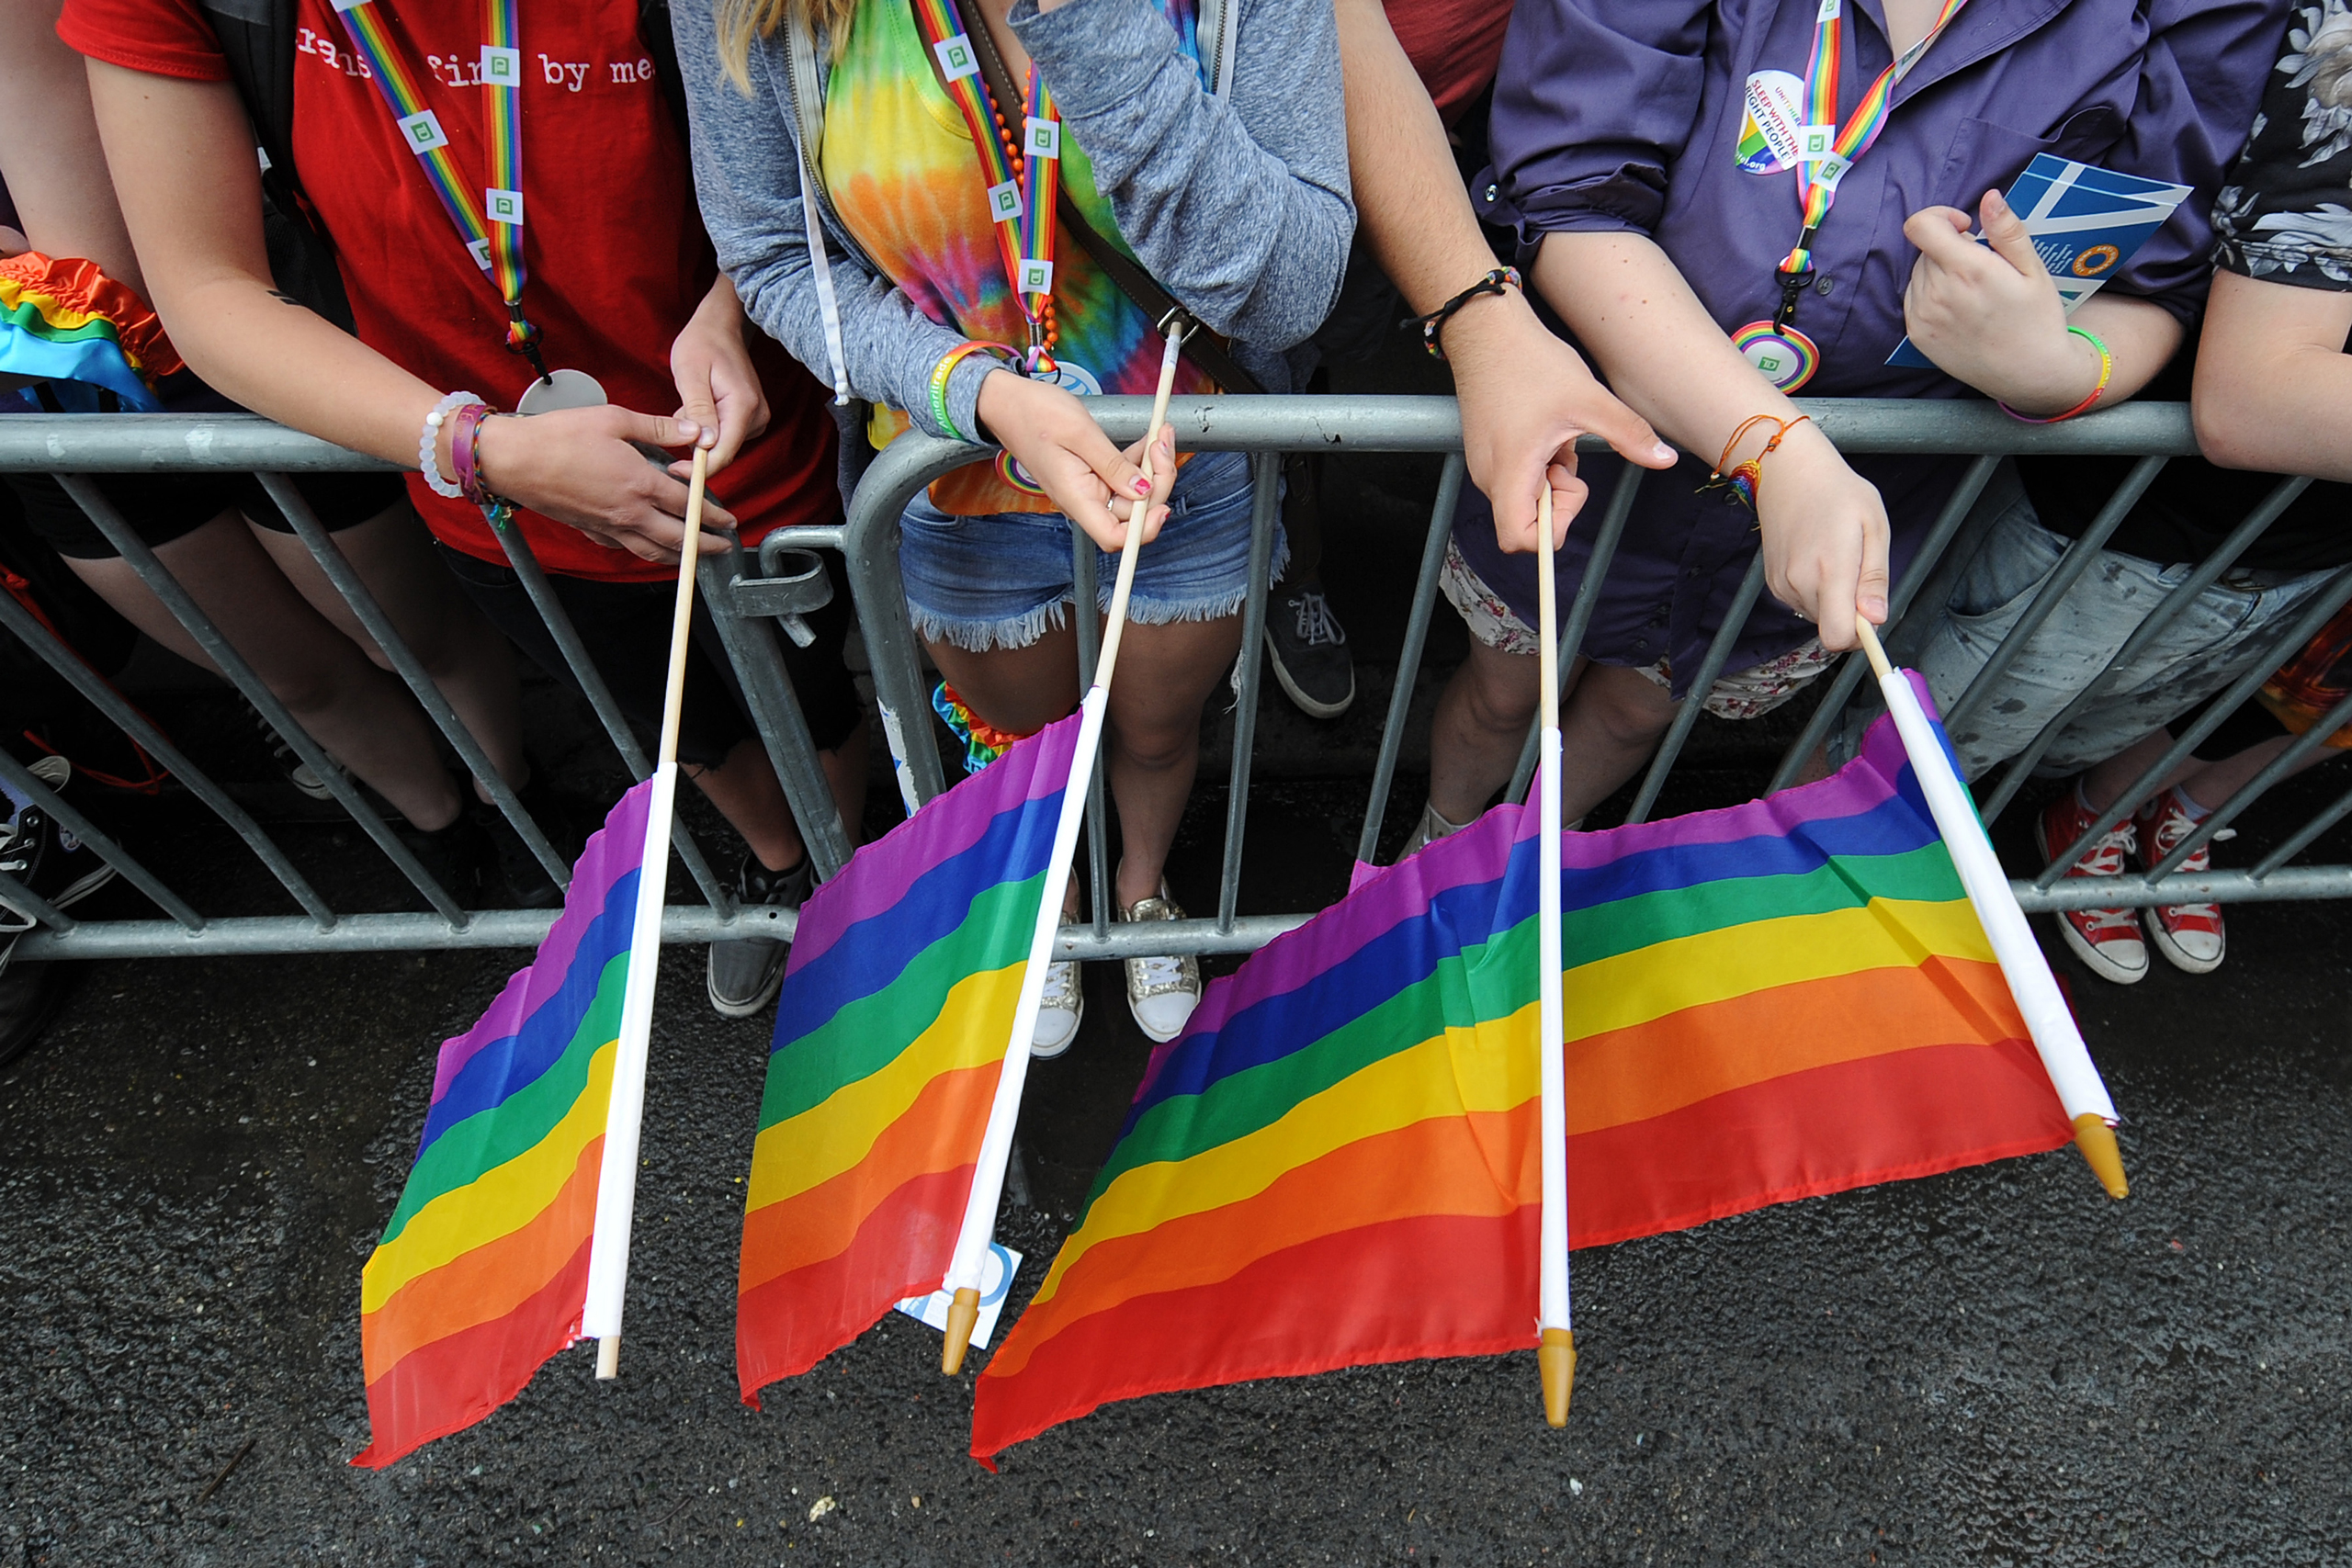 Parade marchers celebrate as they make their way down Fifth Avenue during the 2015 New York City Gay Pride Parade in New York on June 28, 2015. (Anthony Behar—Sipa USA/AP)